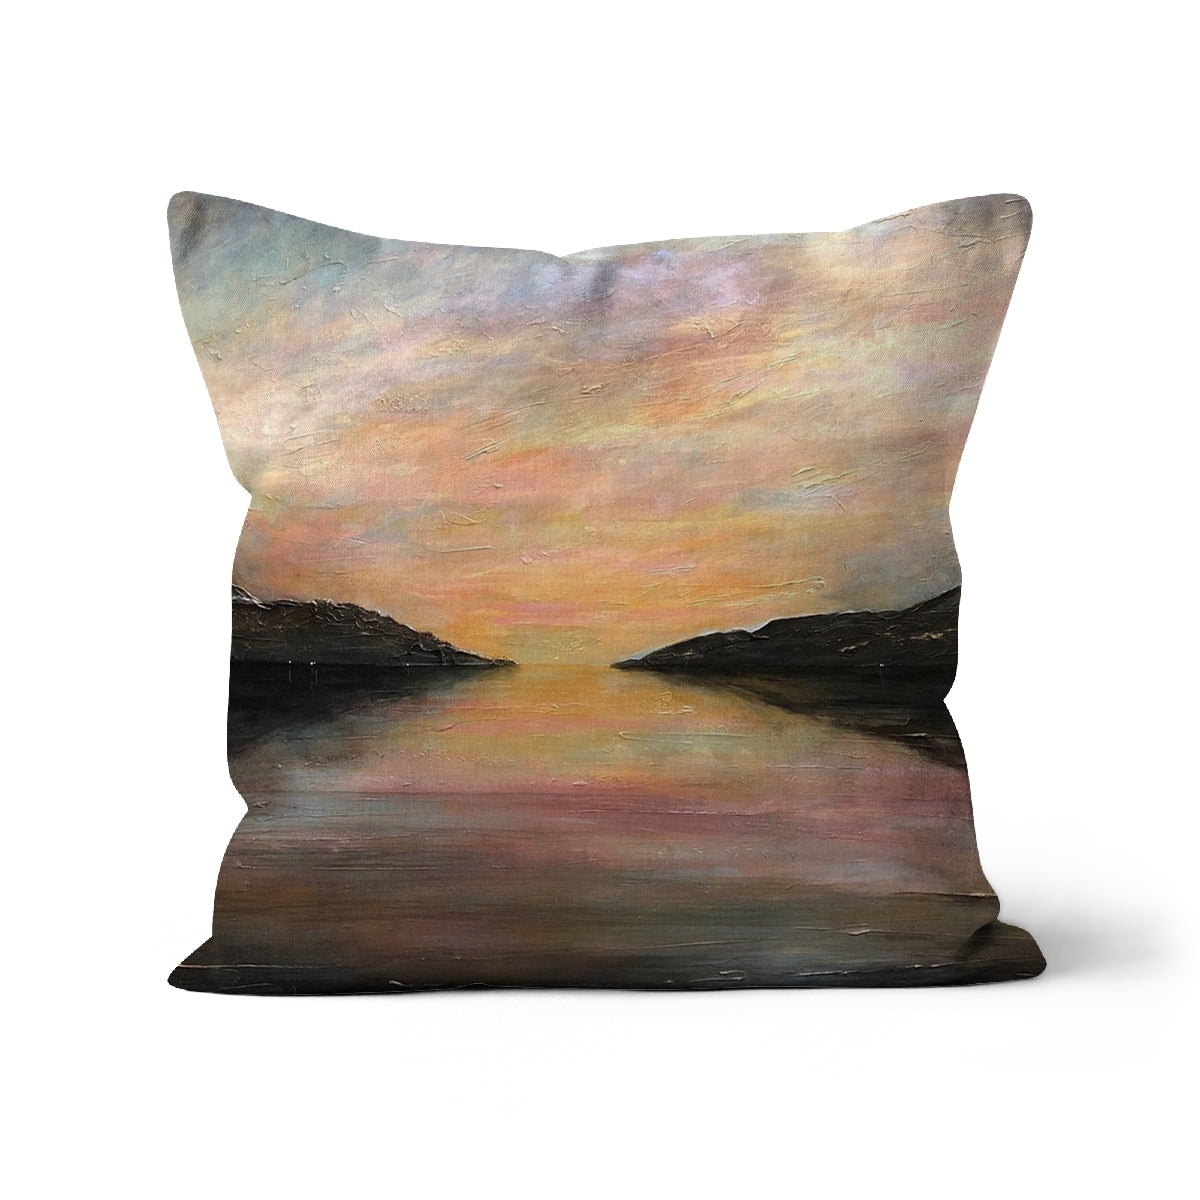 Loch Ness Glow Art Gifts Cushion-Cushions-Scottish Lochs & Mountains Art Gallery-Canvas-12"x12"-Paintings, Prints, Homeware, Art Gifts From Scotland By Scottish Artist Kevin Hunter